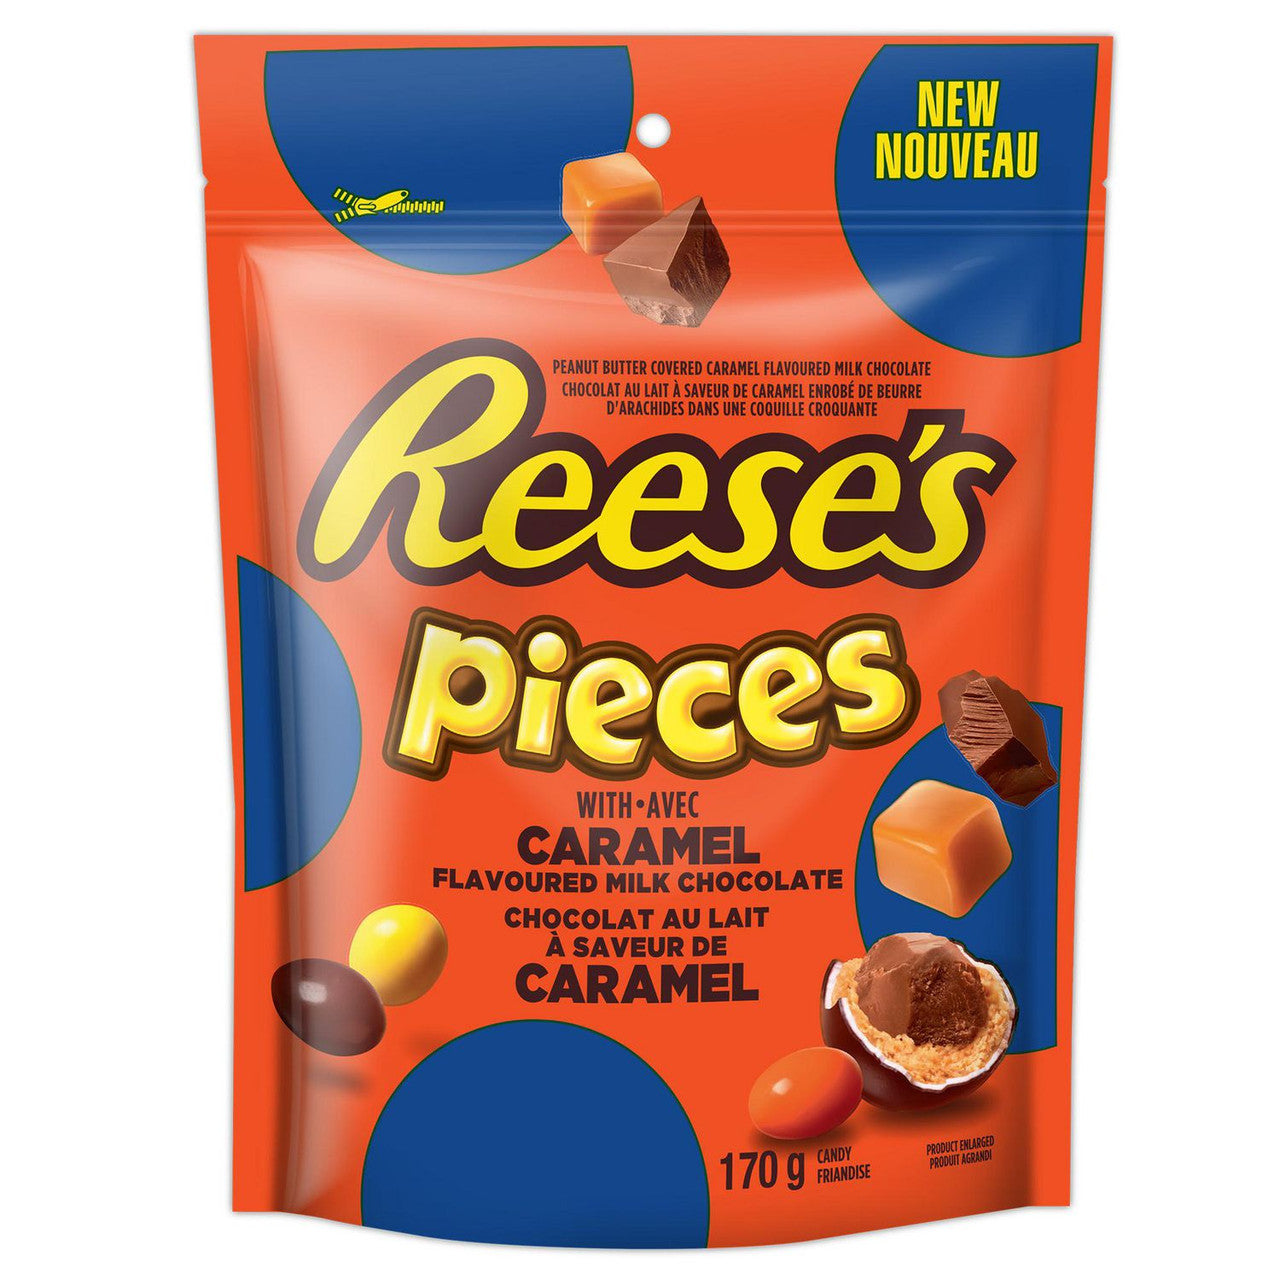 Reese's Pieces Candy - 6-oz. Bag